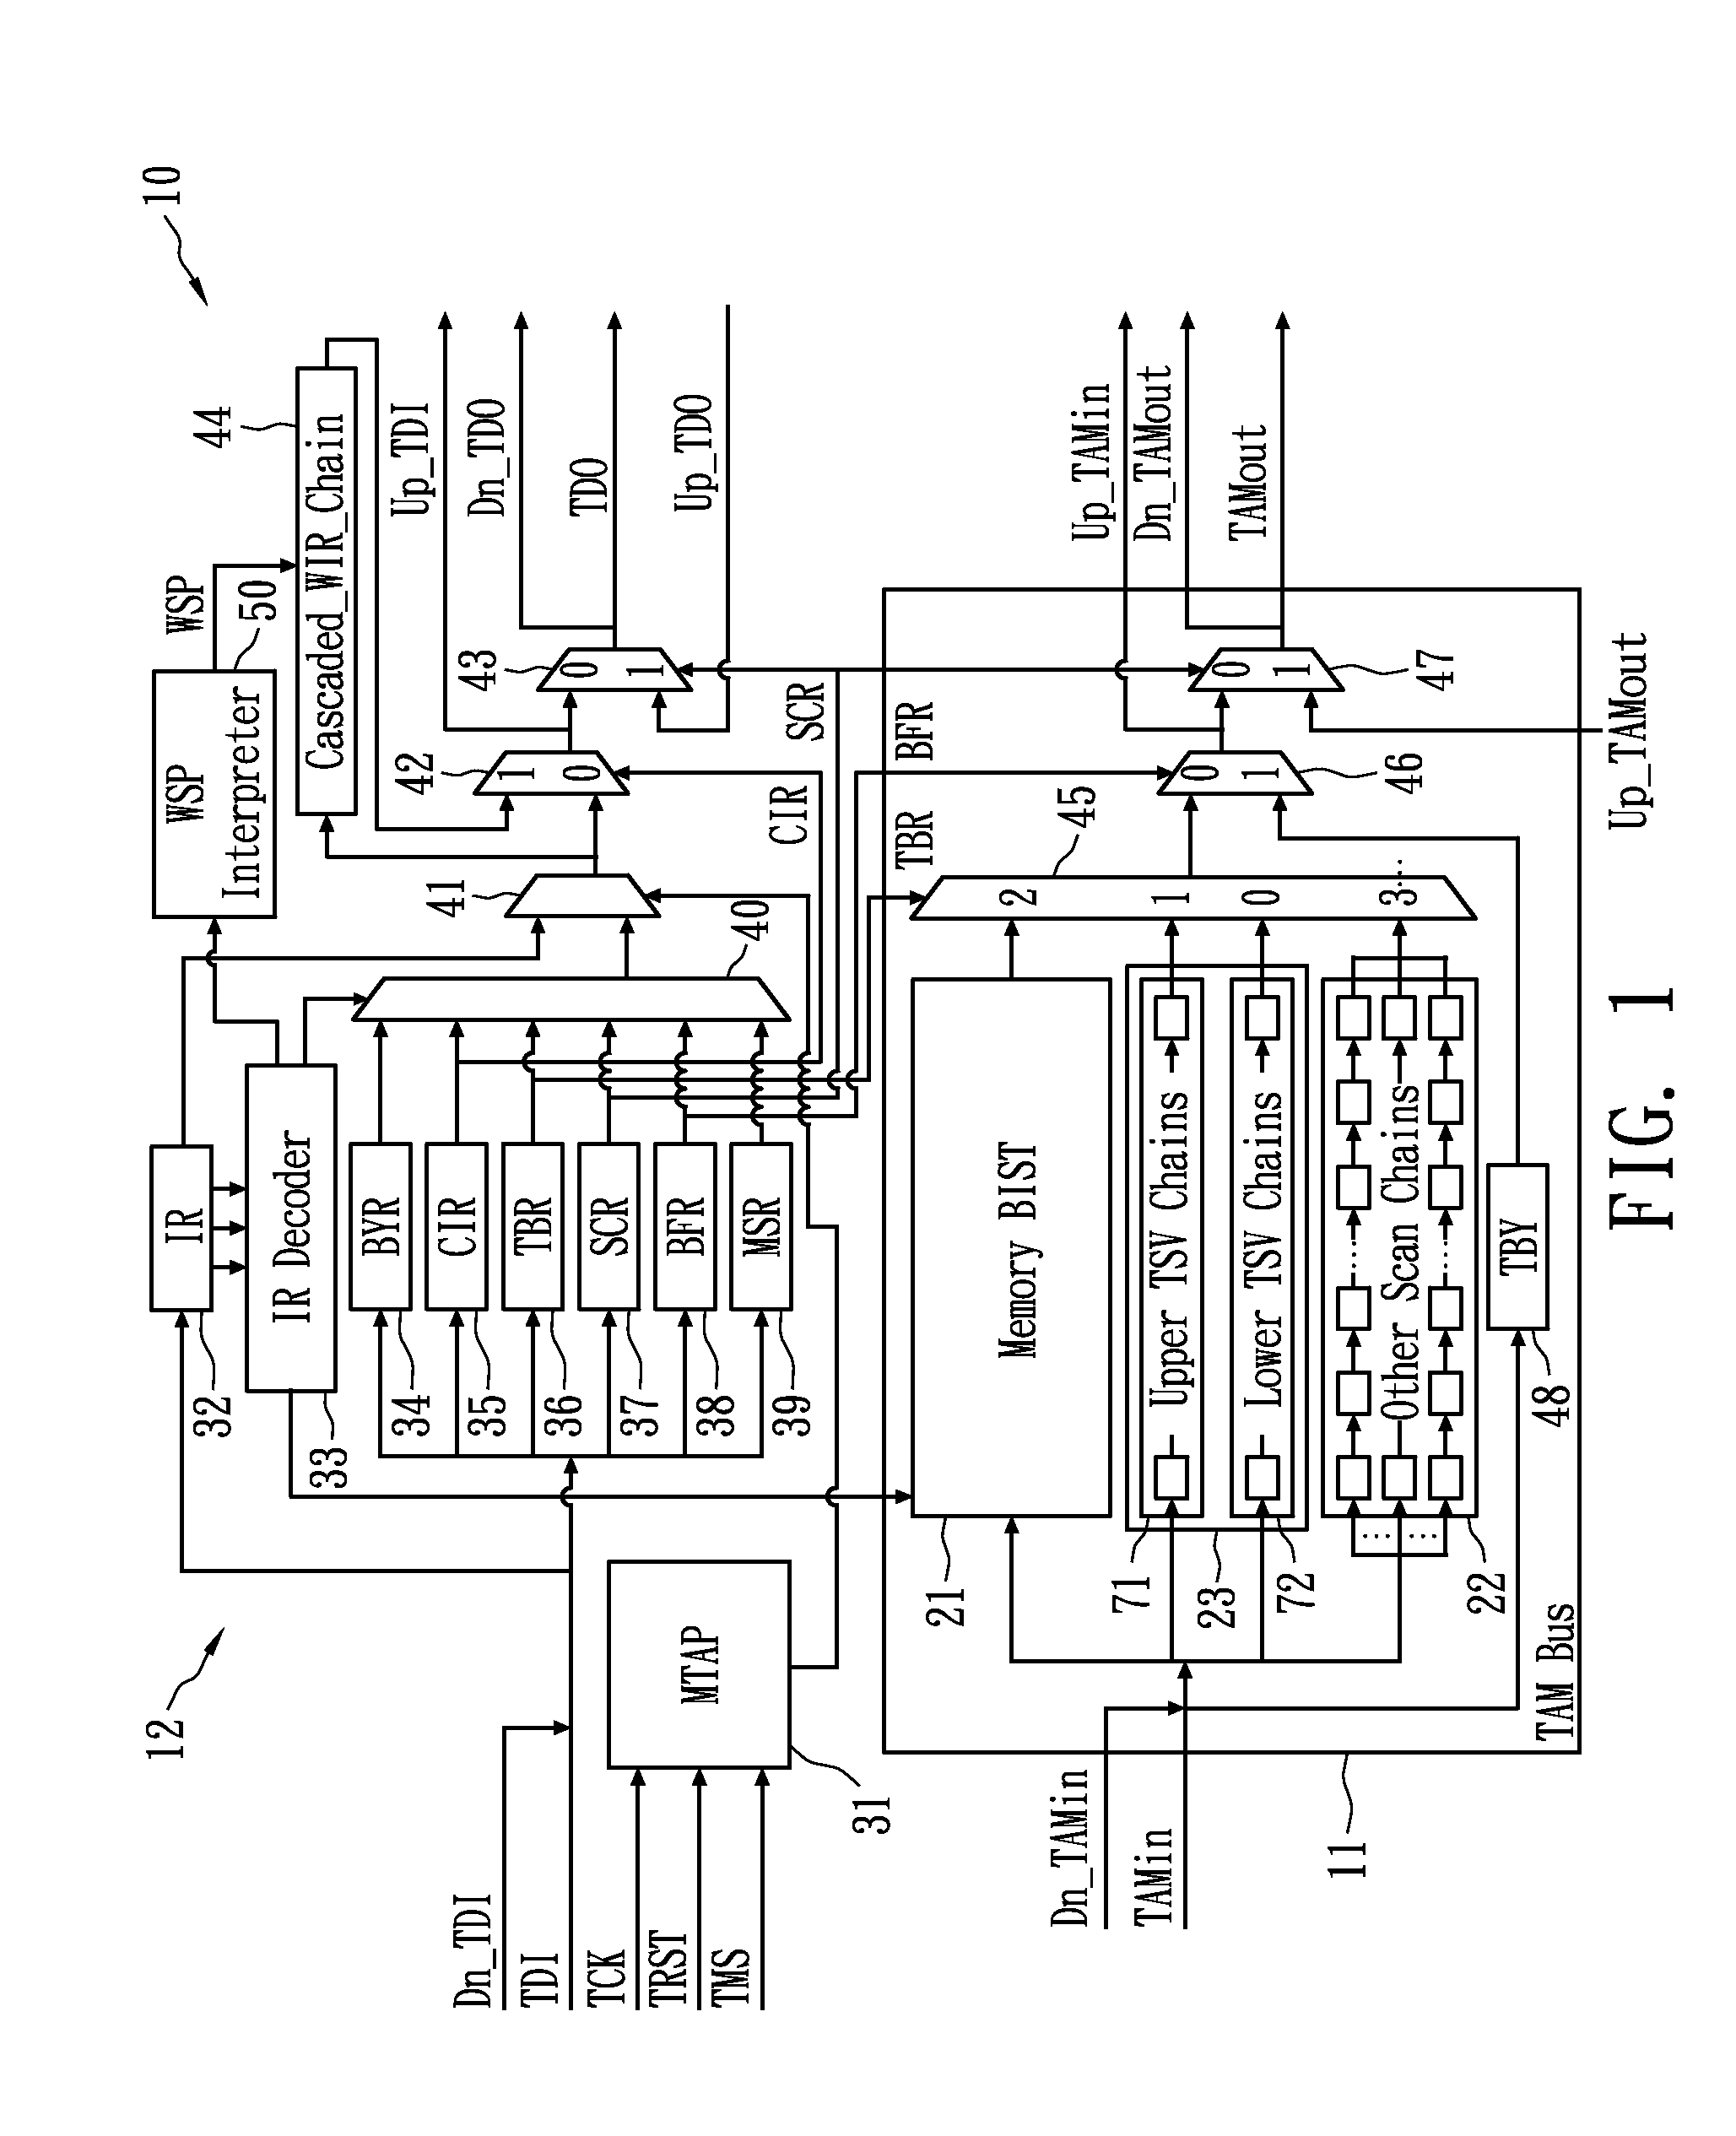 Test access control apparatus and method thereof